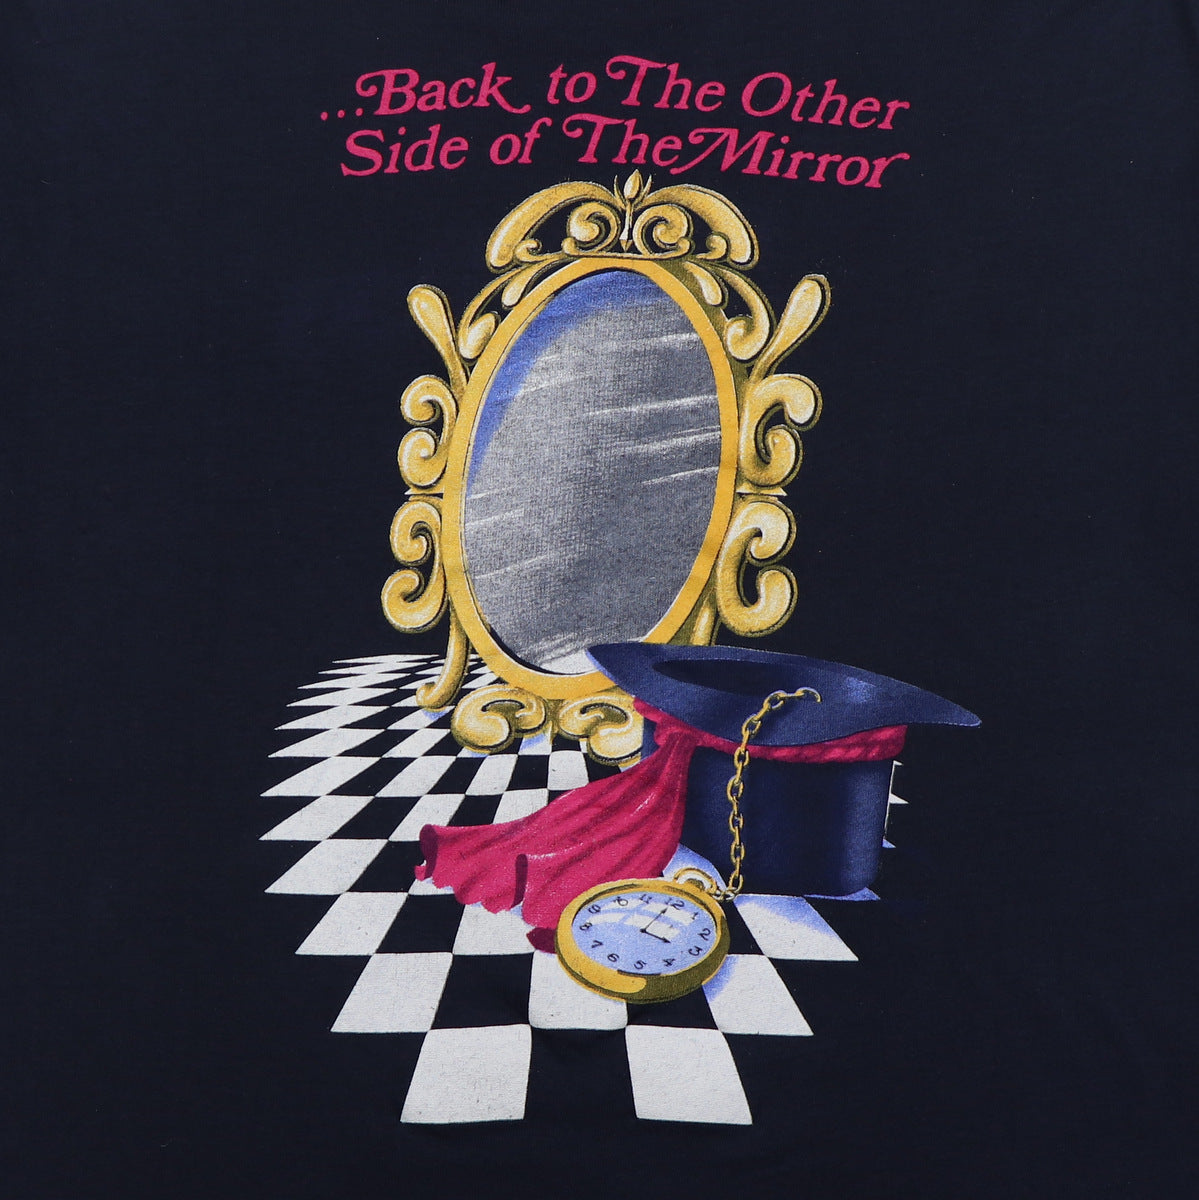 1989 Stevie Nicks Back To The Other Side Of The Mirror Shirt